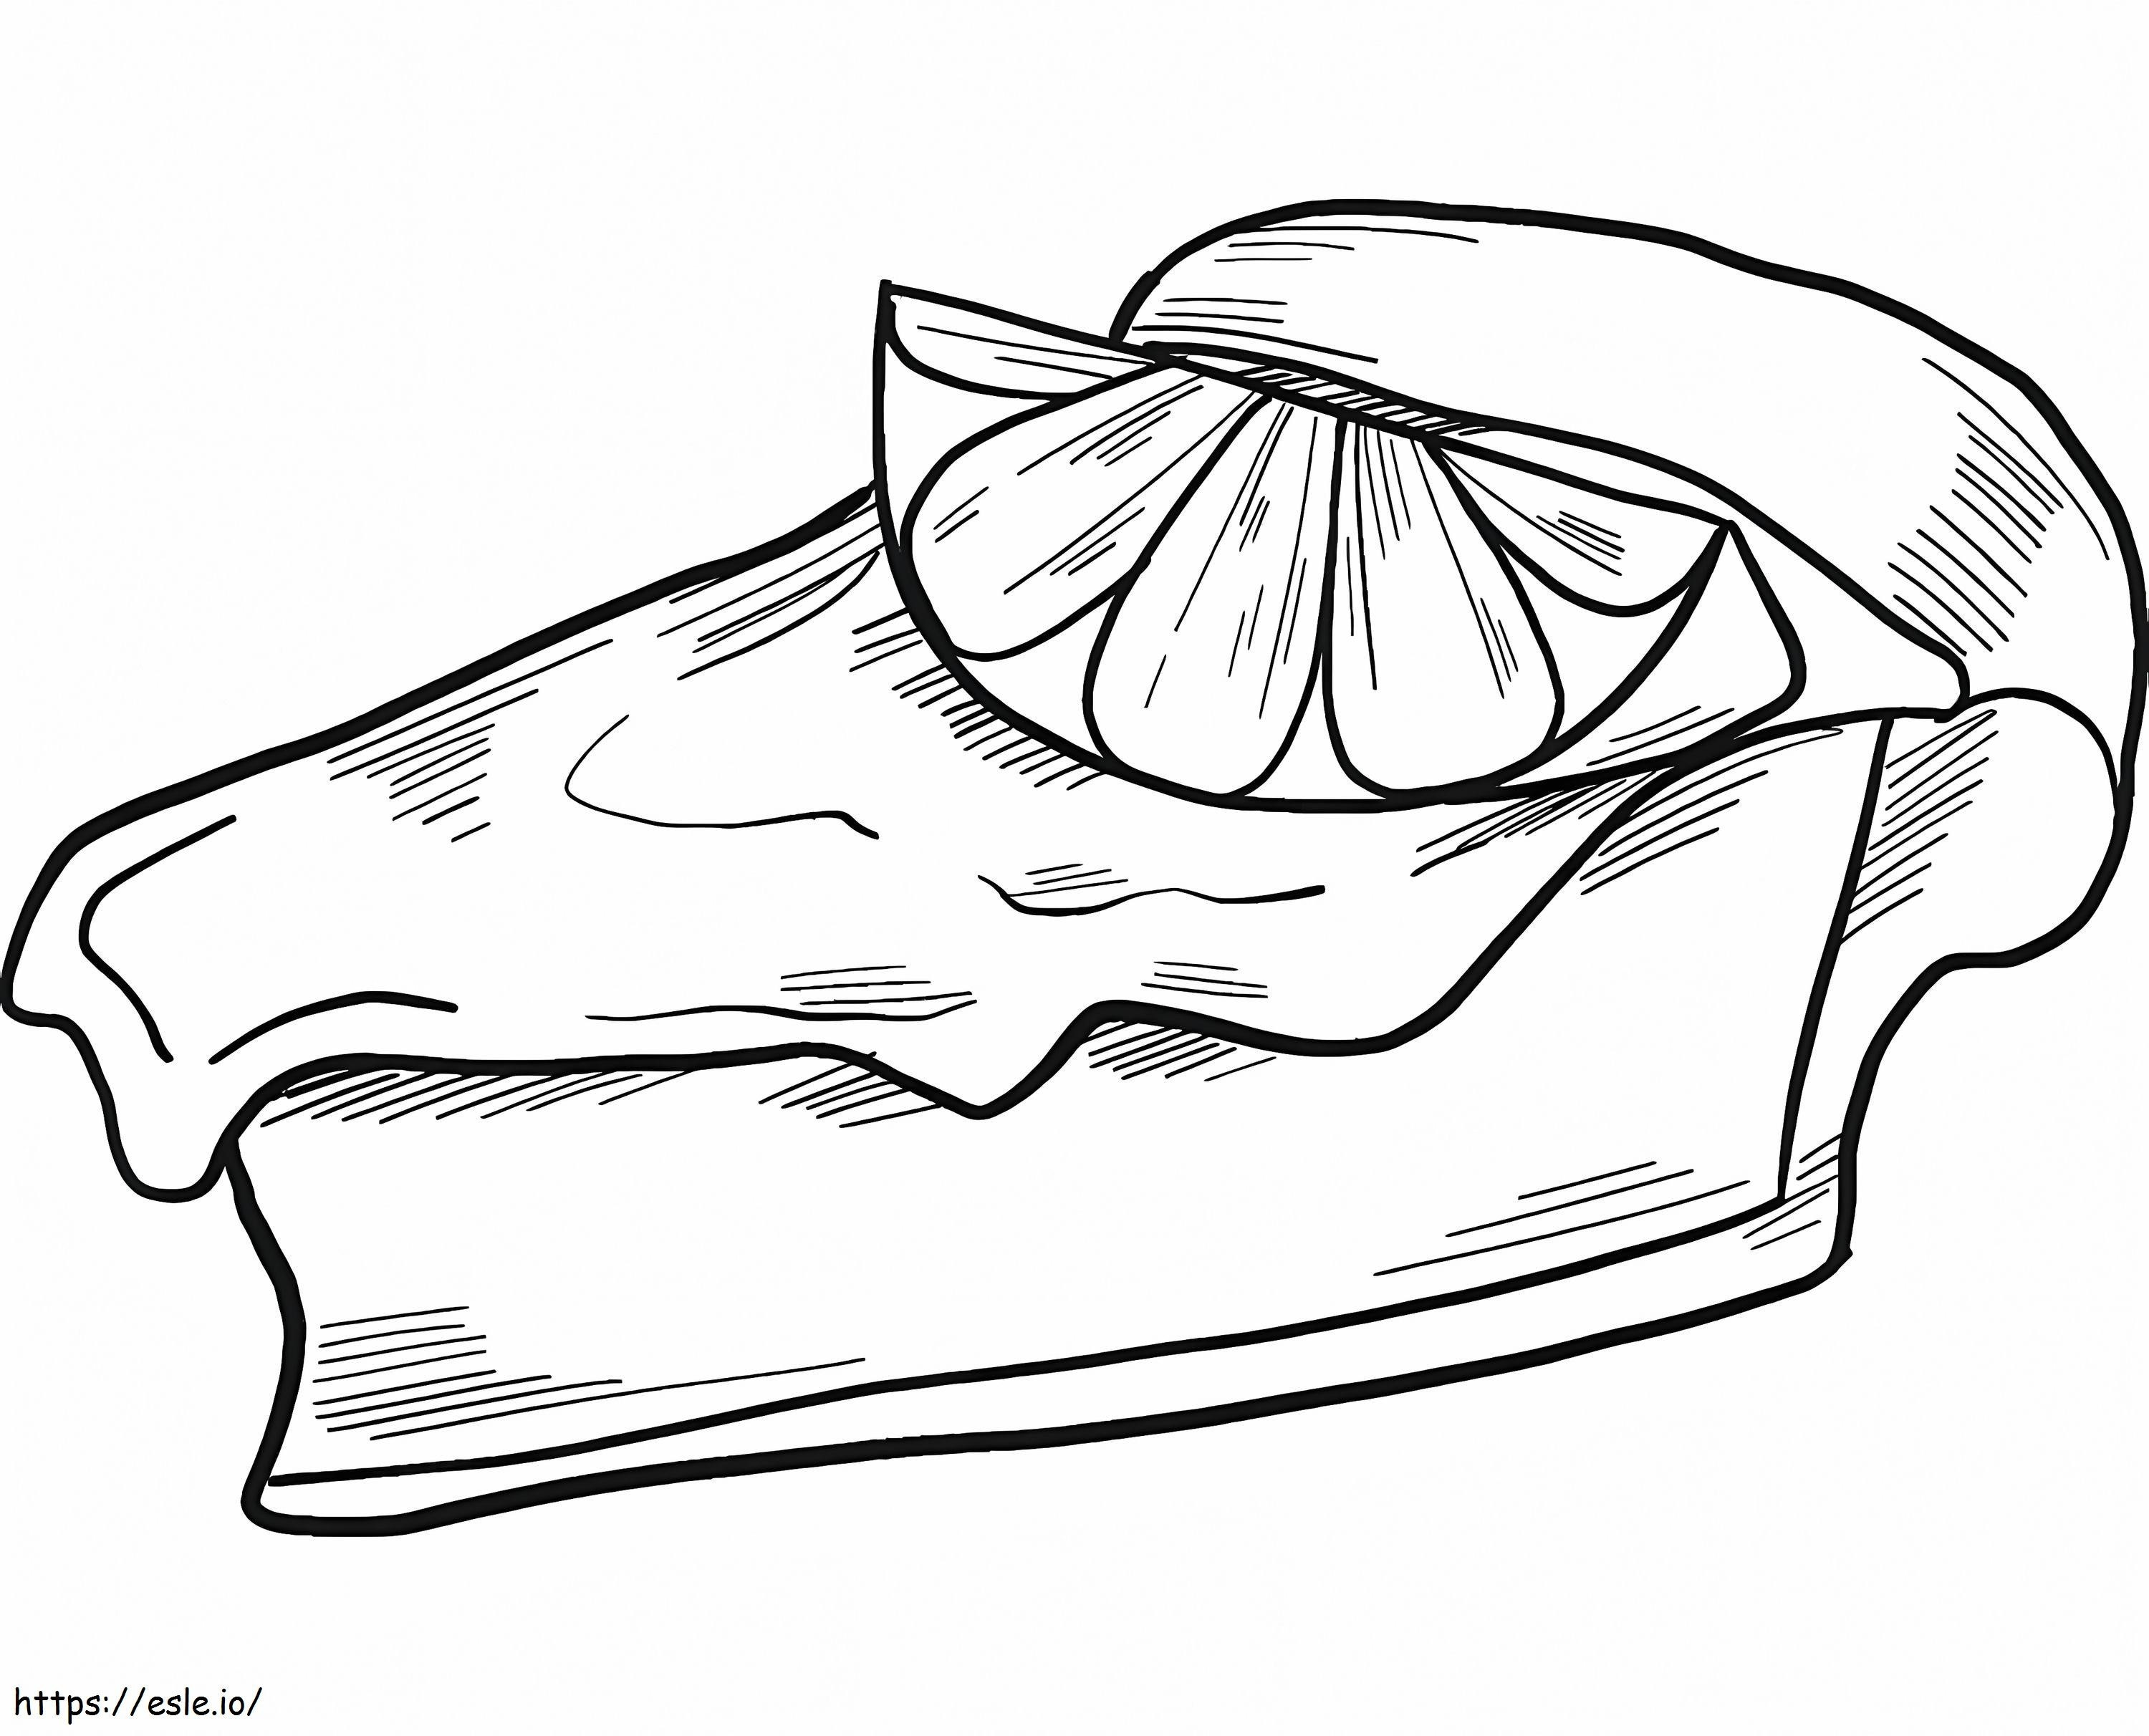 Piece Of Pie coloring page